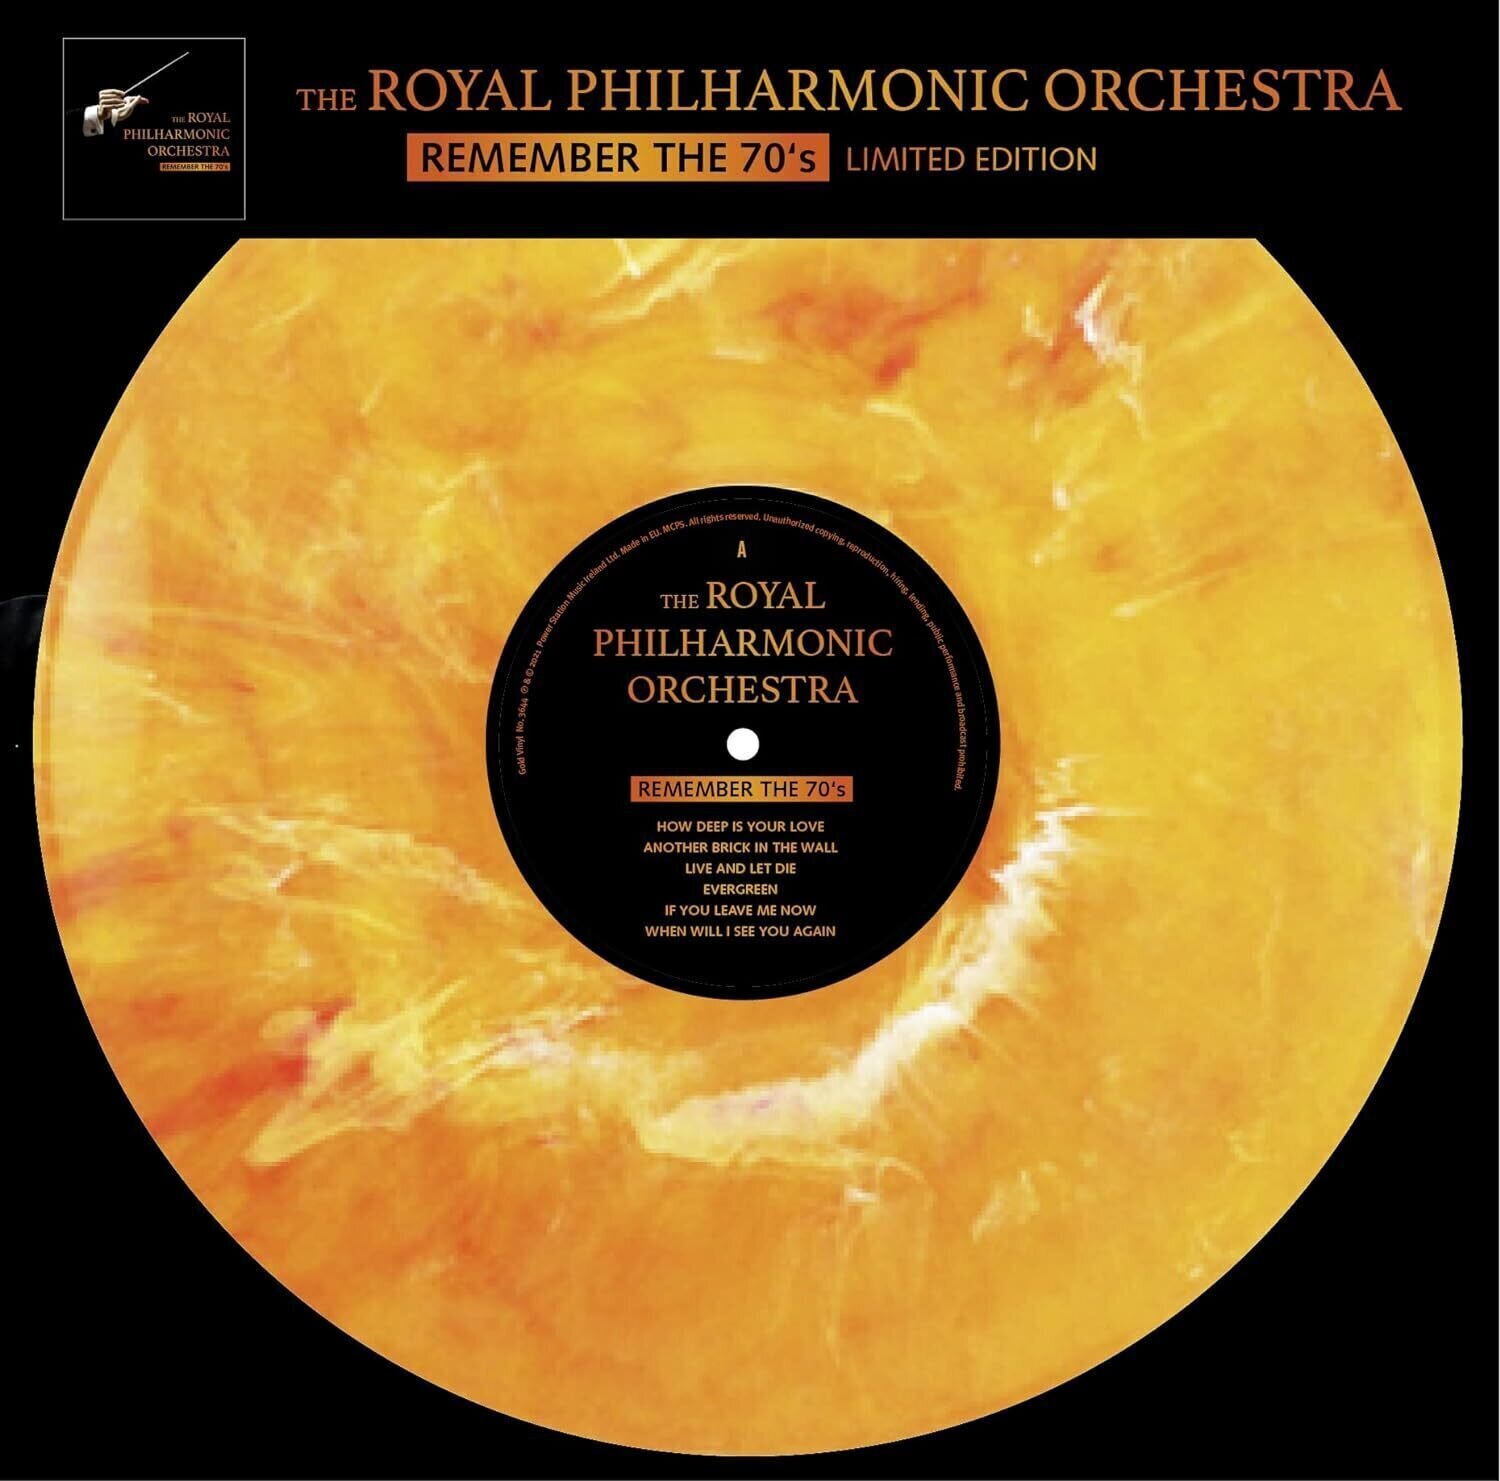 Vinylplade Royal Philharmonic Orchestra - Remember The 70's (Limited Edition) (Numbered) (Marbled Coloured) (LP)